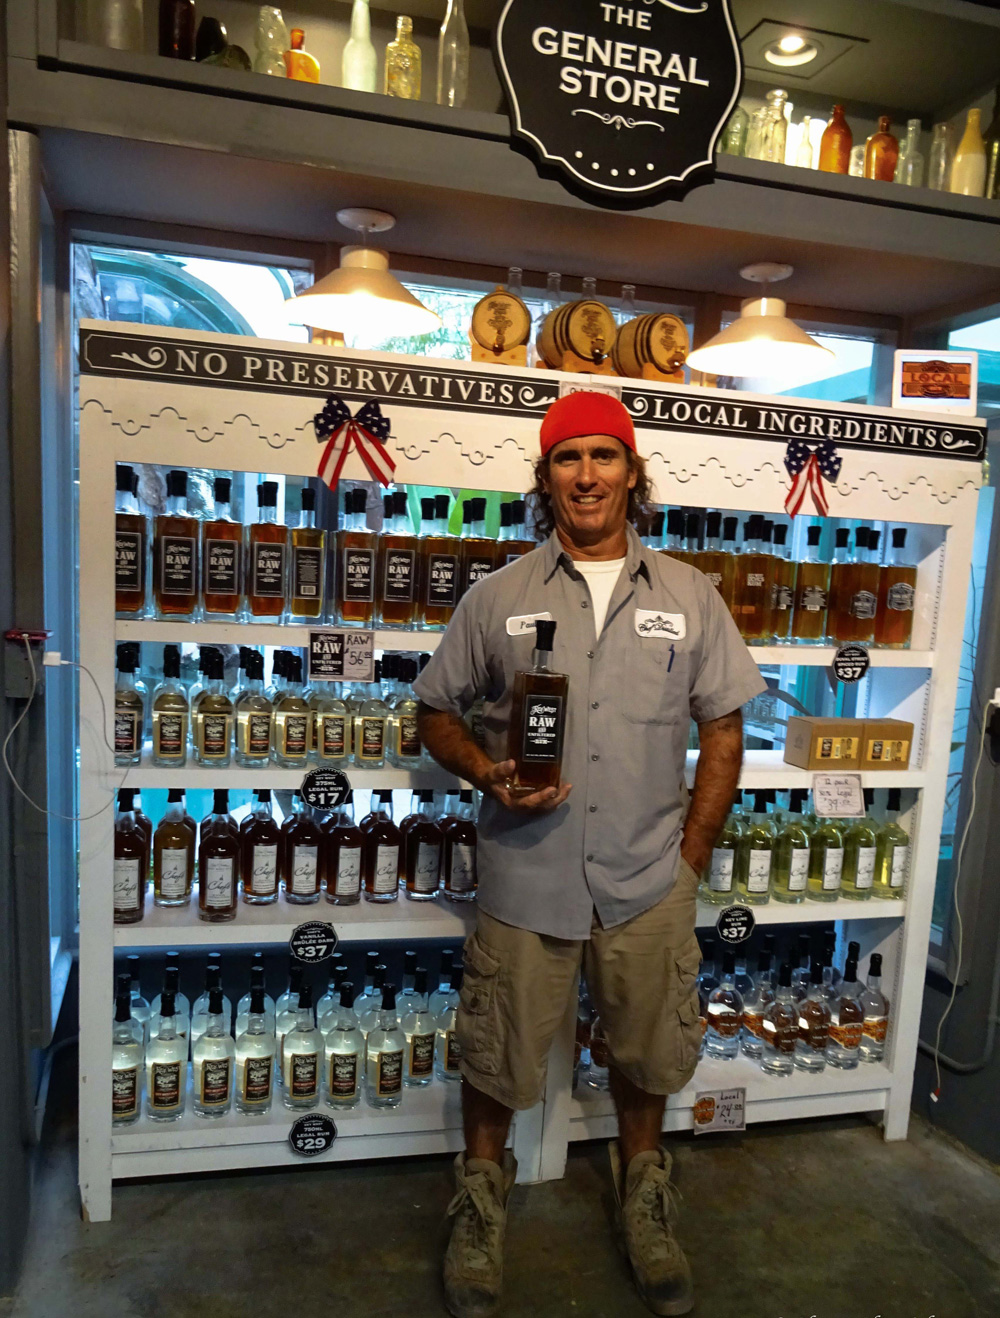 Meet Mike Menta, Chef and Kite boarder, owner of Key West’s First Legal Rum Distillery. He’ll regale visitors with quirky tales and rum-tasting sessions.